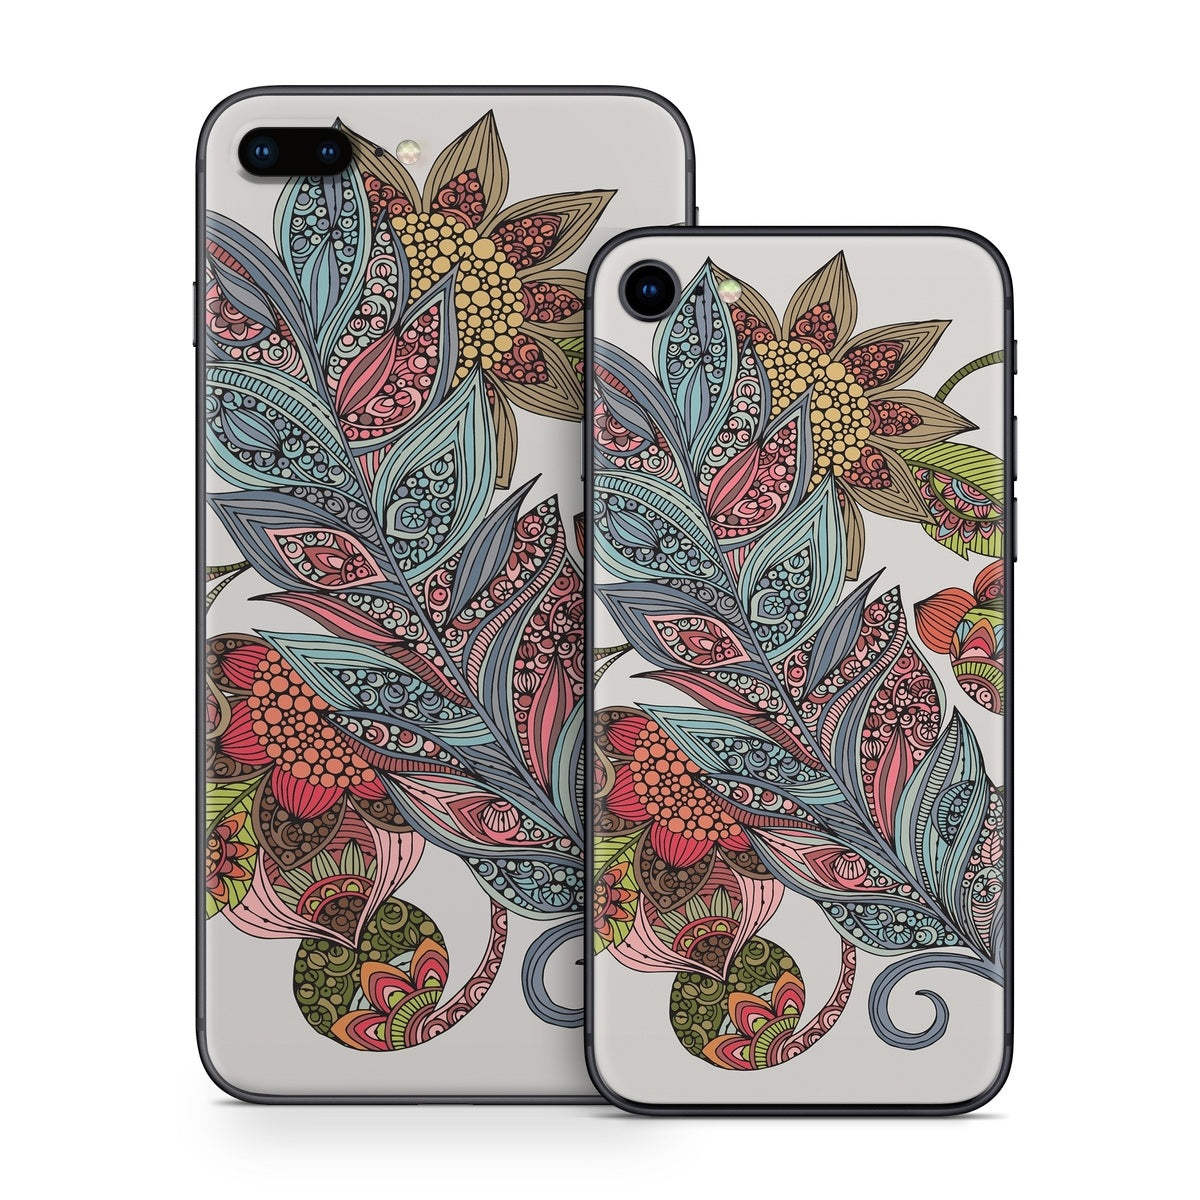 Feather Flower - Apple iPhone 8 Skin